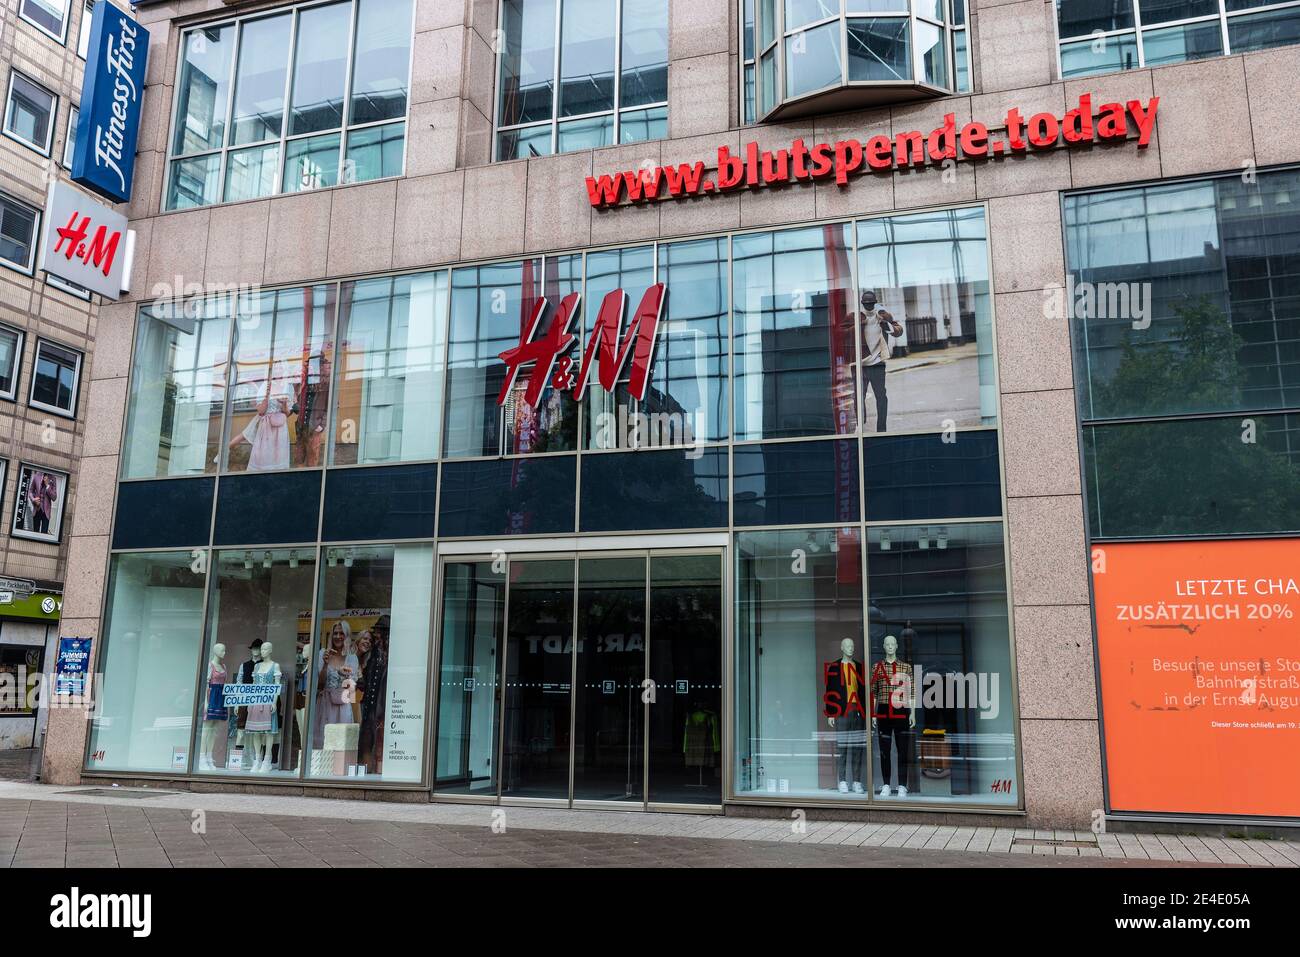 Hanover, Germany - August 18, 2019: Facade of a HM or H&M clothing store in  a shopping street of Hanover, Germany Stock Photo - Alamy